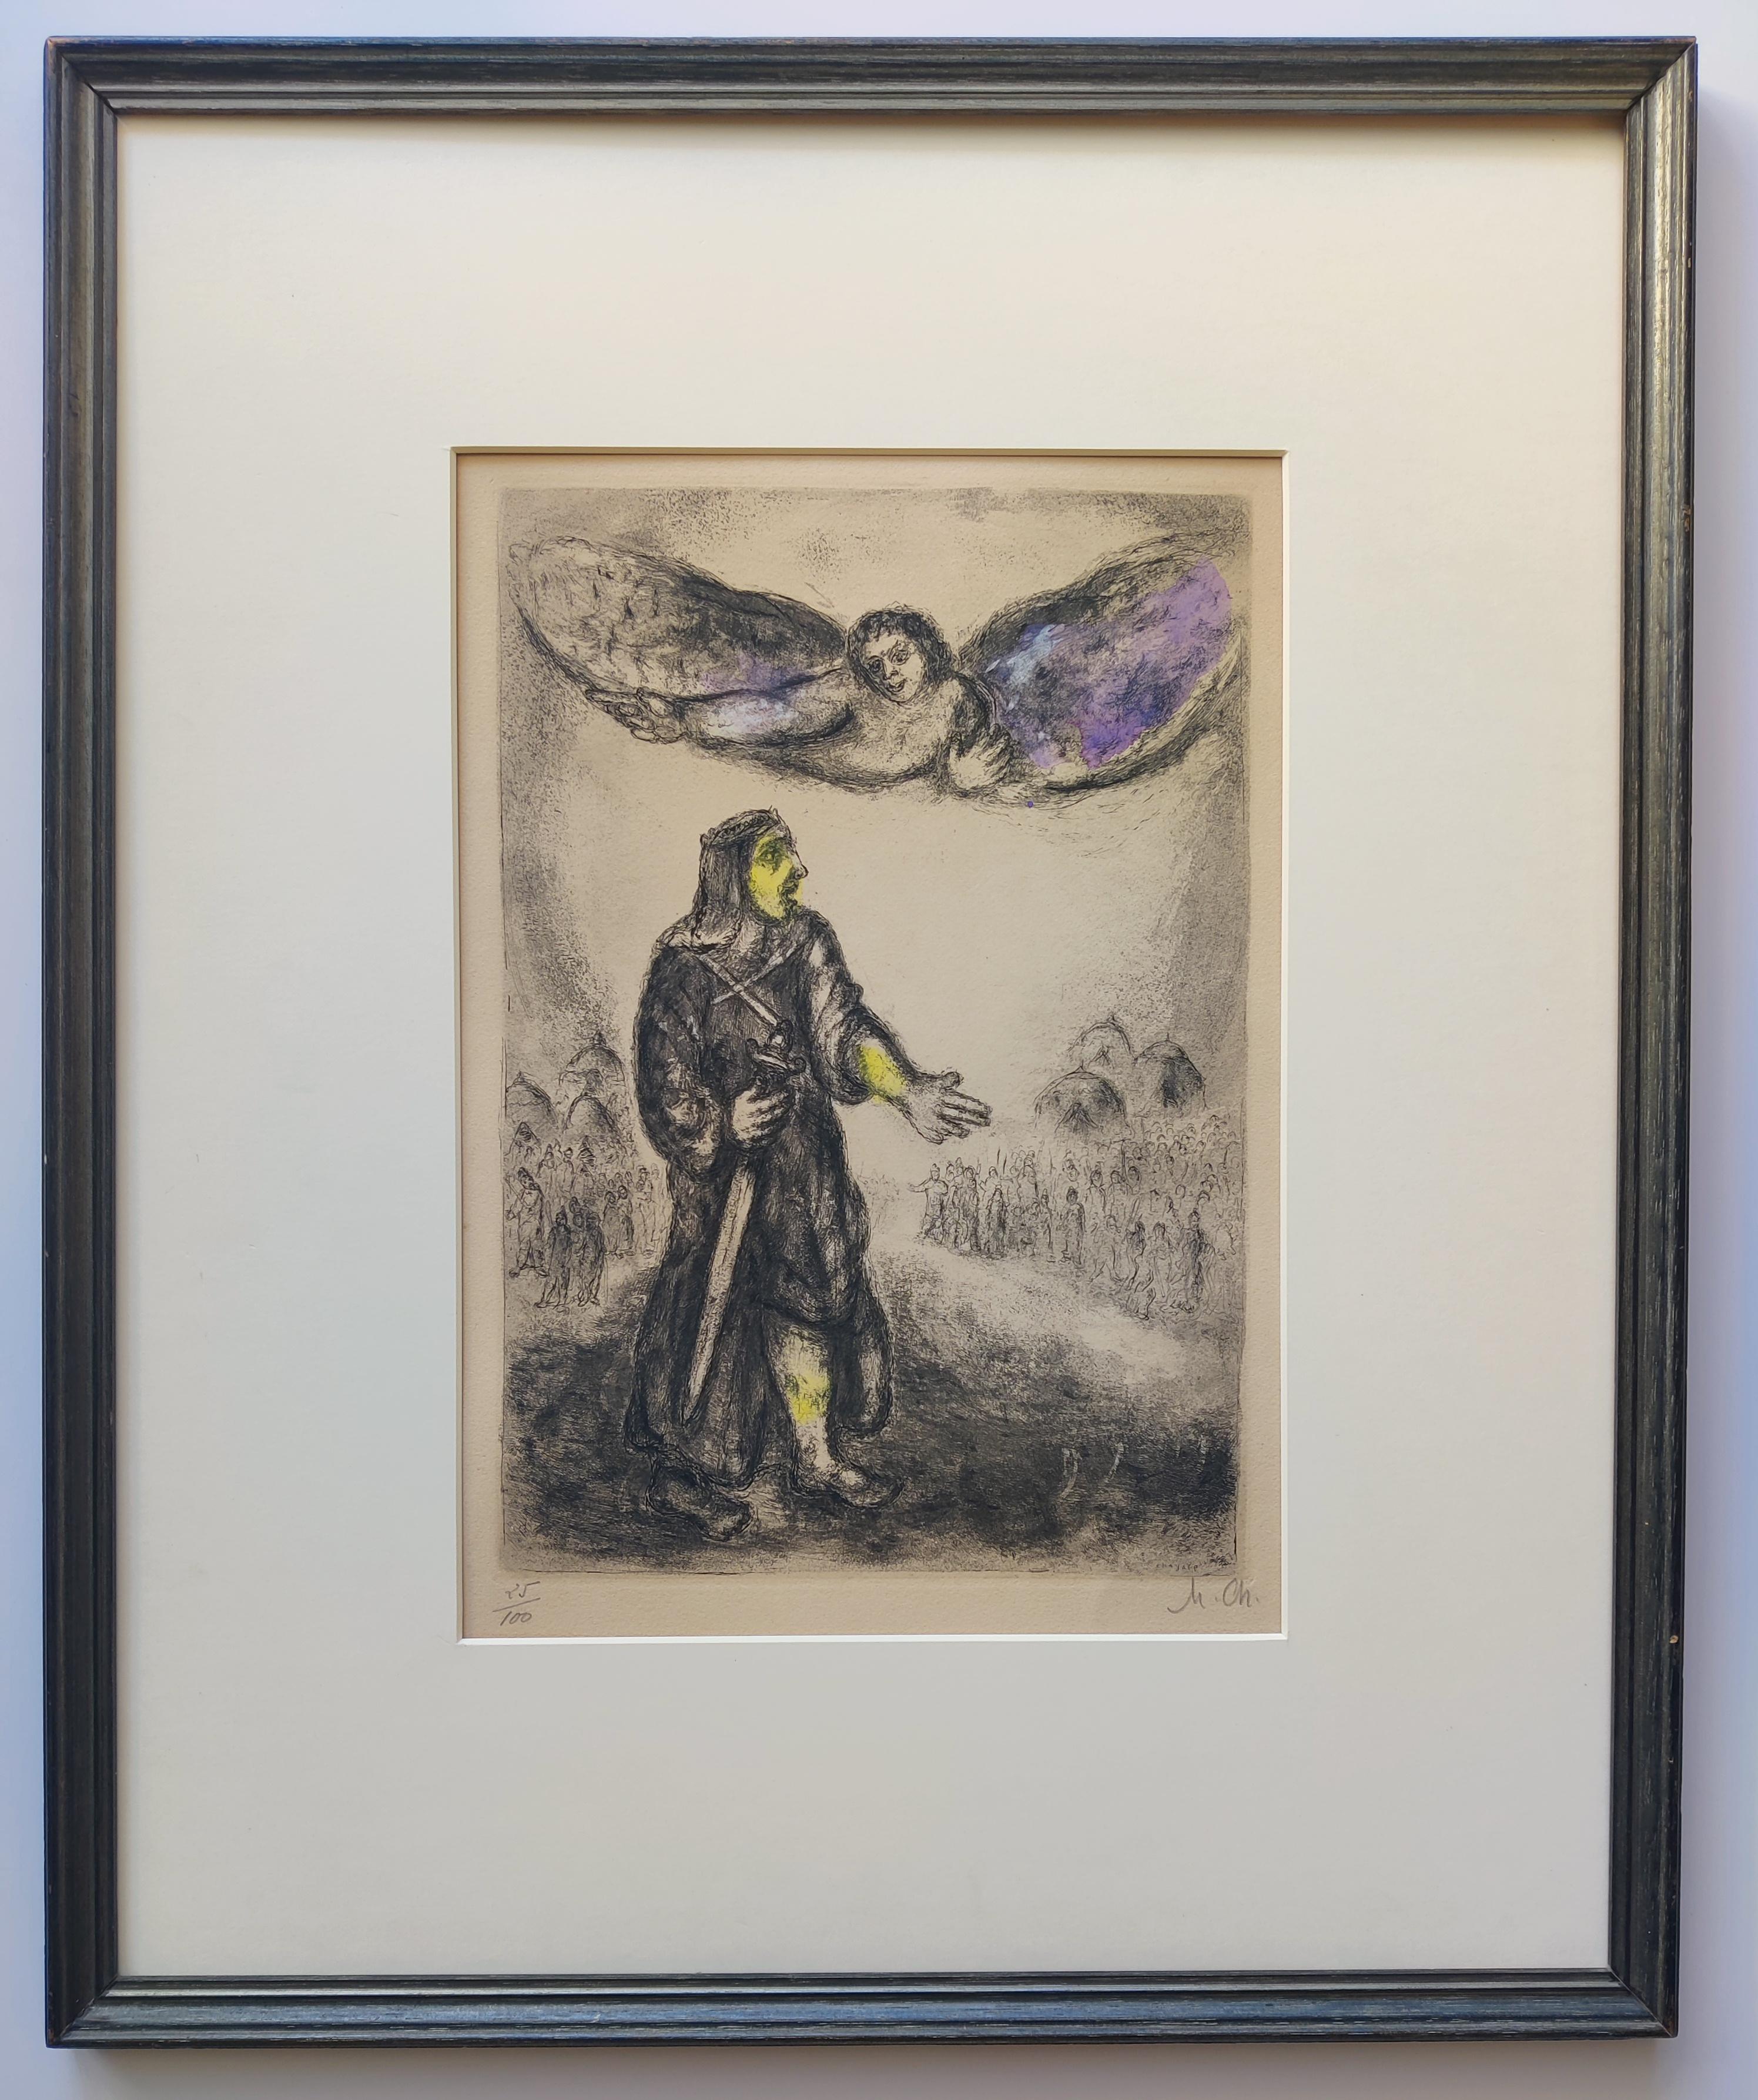 Joshua Before Jericho (Josue devant Jericho), pl. 46 (from the Bible), 1958 - Print by Marc Chagall